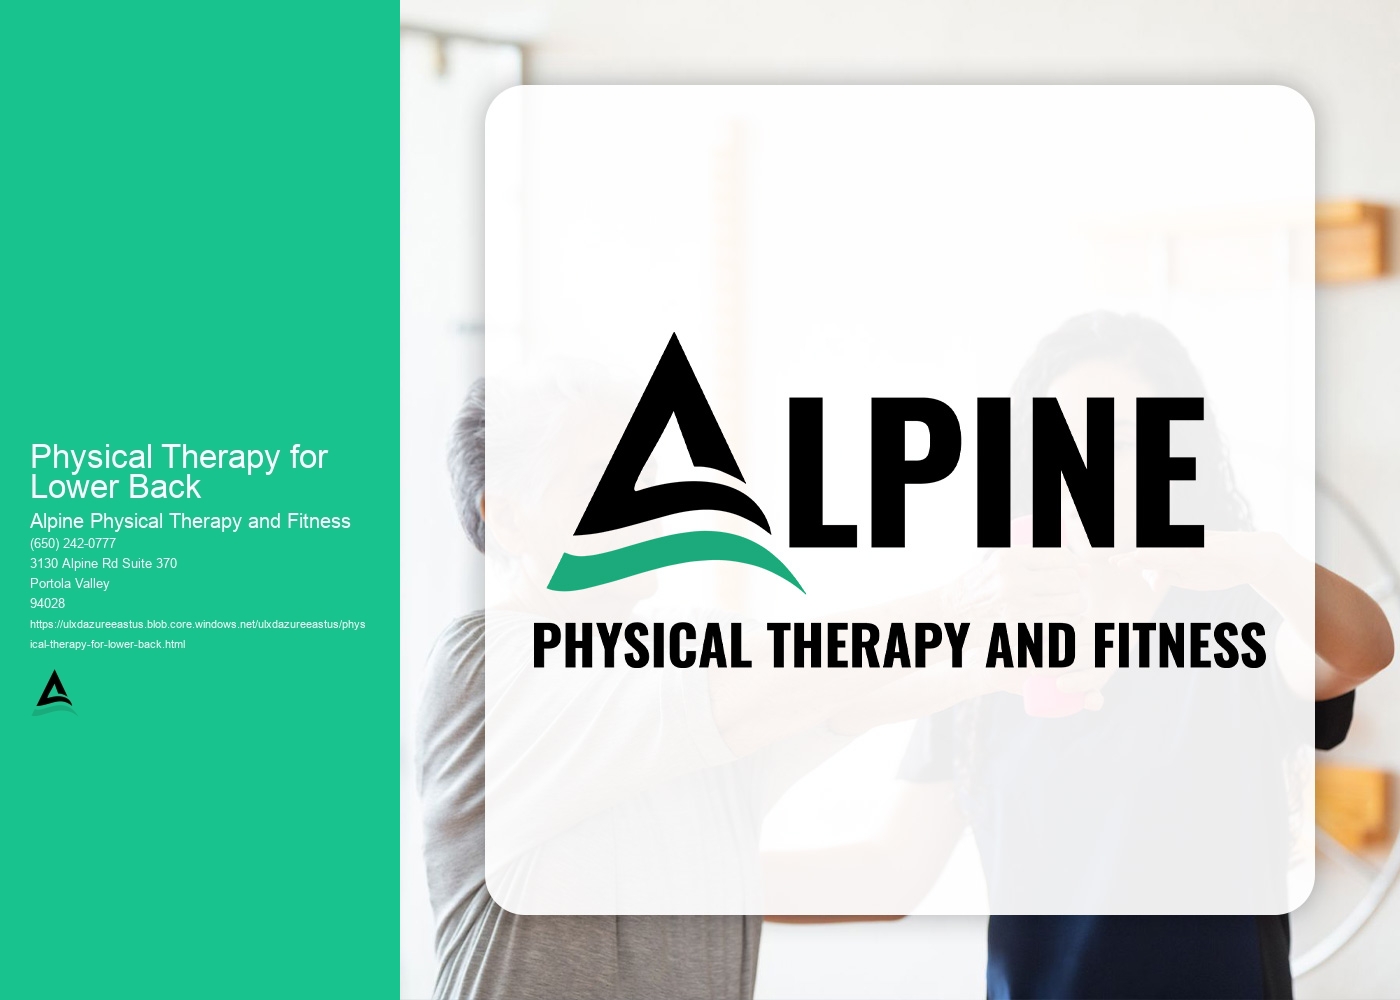 Can physical therapy help individuals with chronic lower back issues manage their symptoms and prevent future flare-ups?